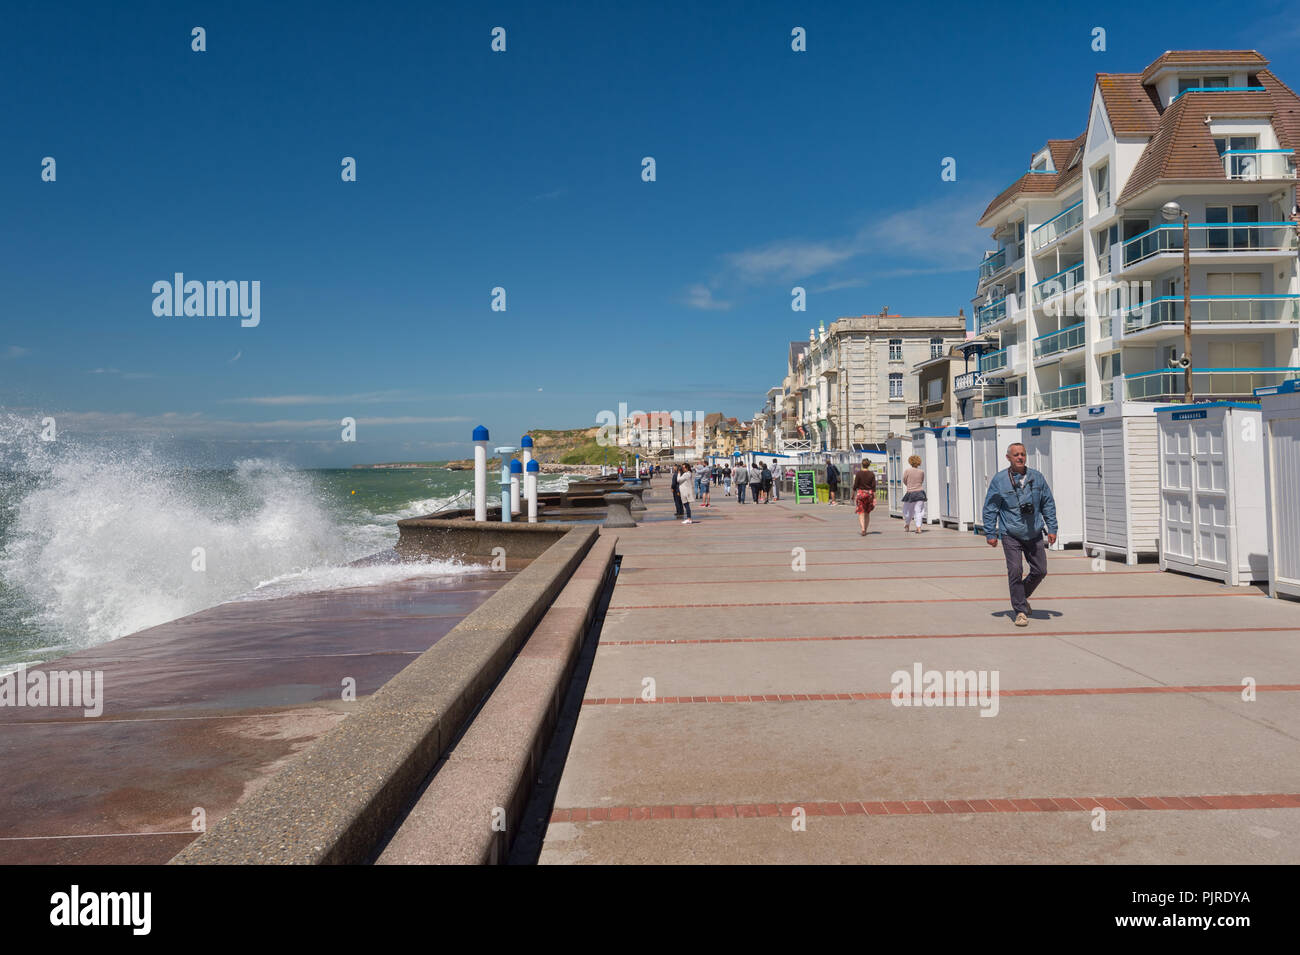 Wimereux, France - 16 June 2018: People walking on the sea front promenade as waves are hitting the sea wall. Stock Photo